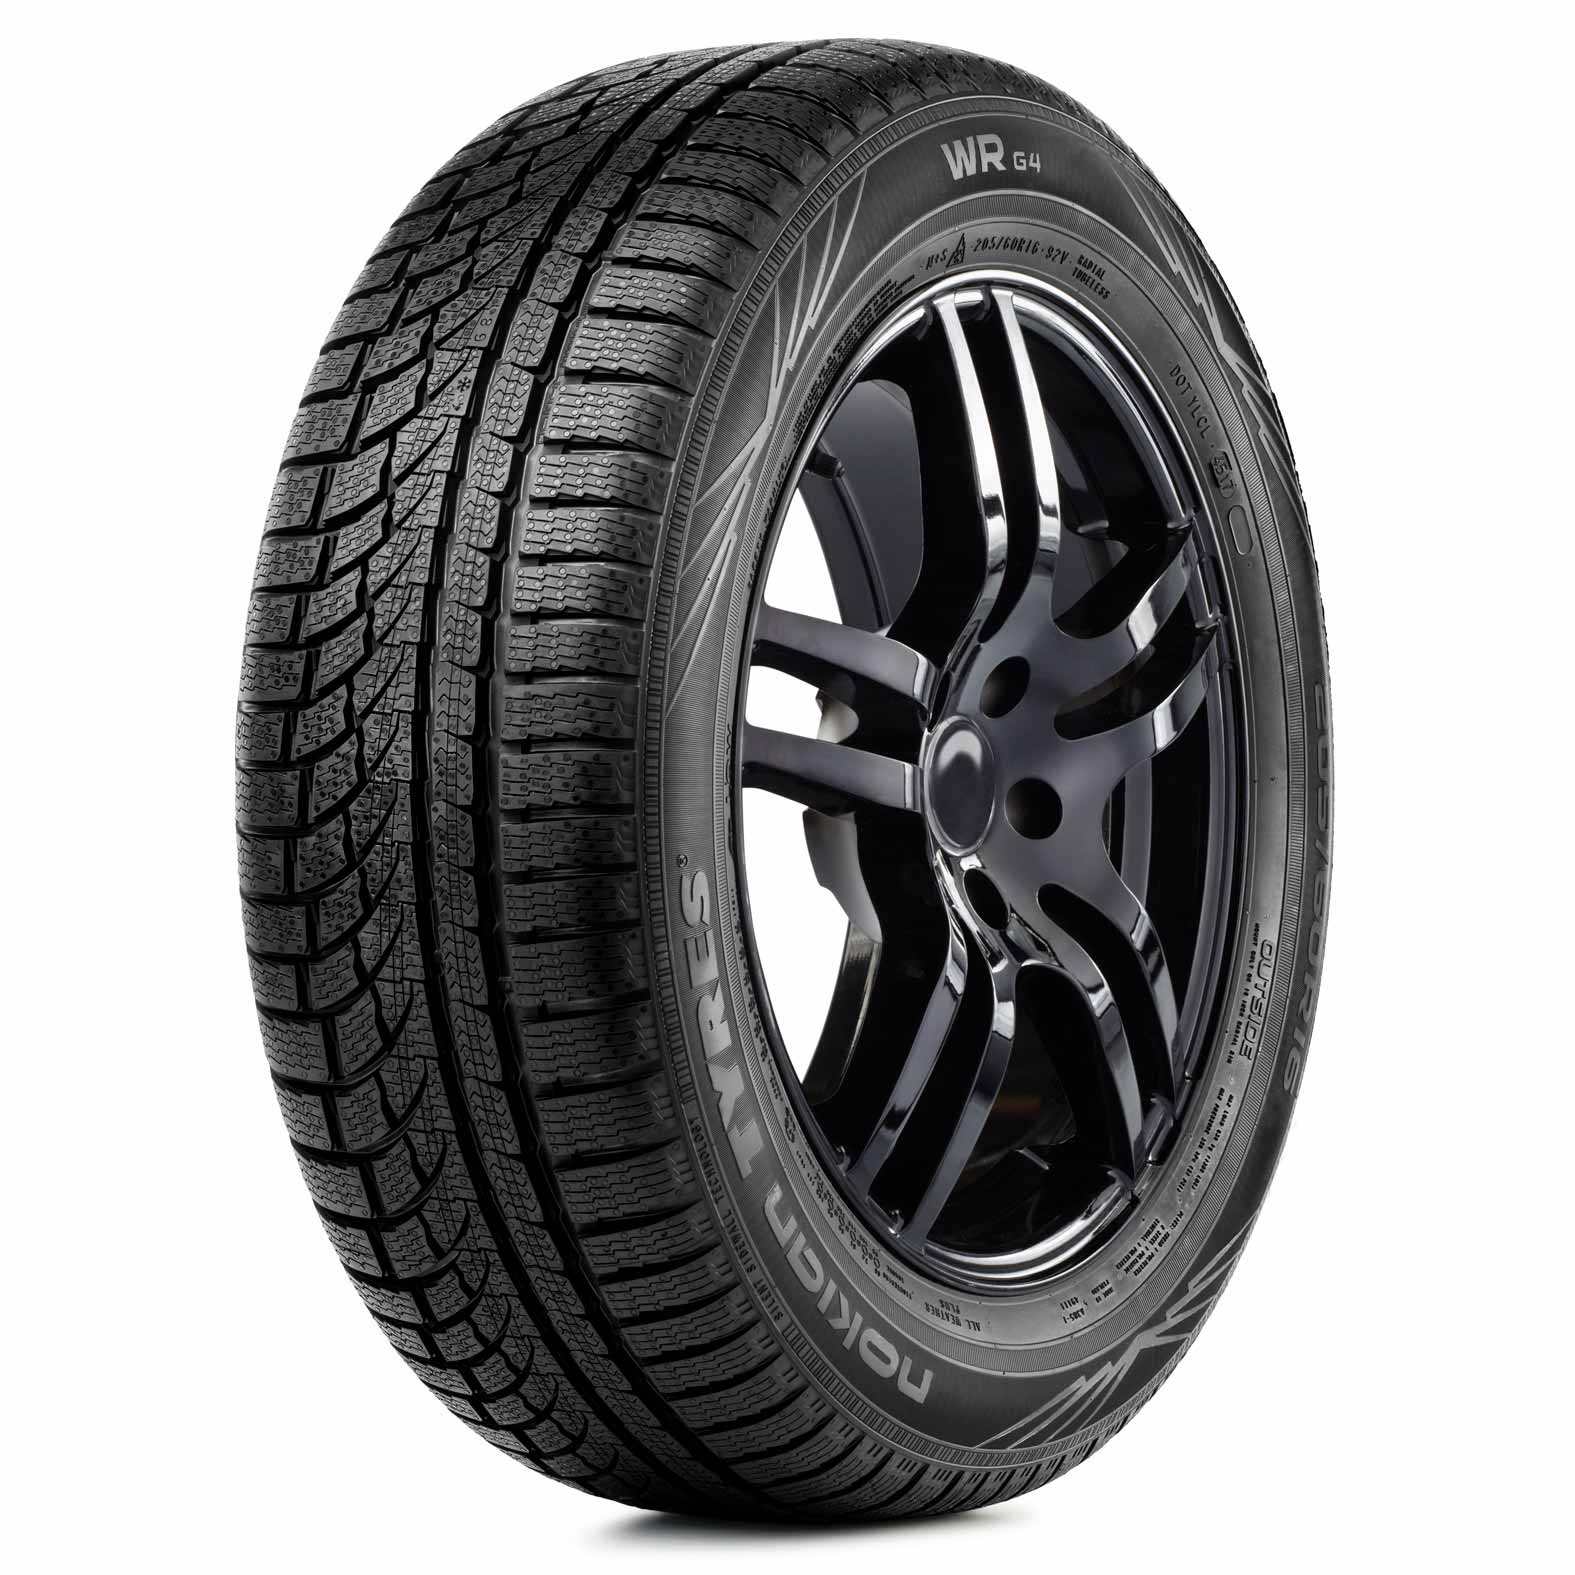 Nokian WRG4 Tires for All-Weather | Kal Tire